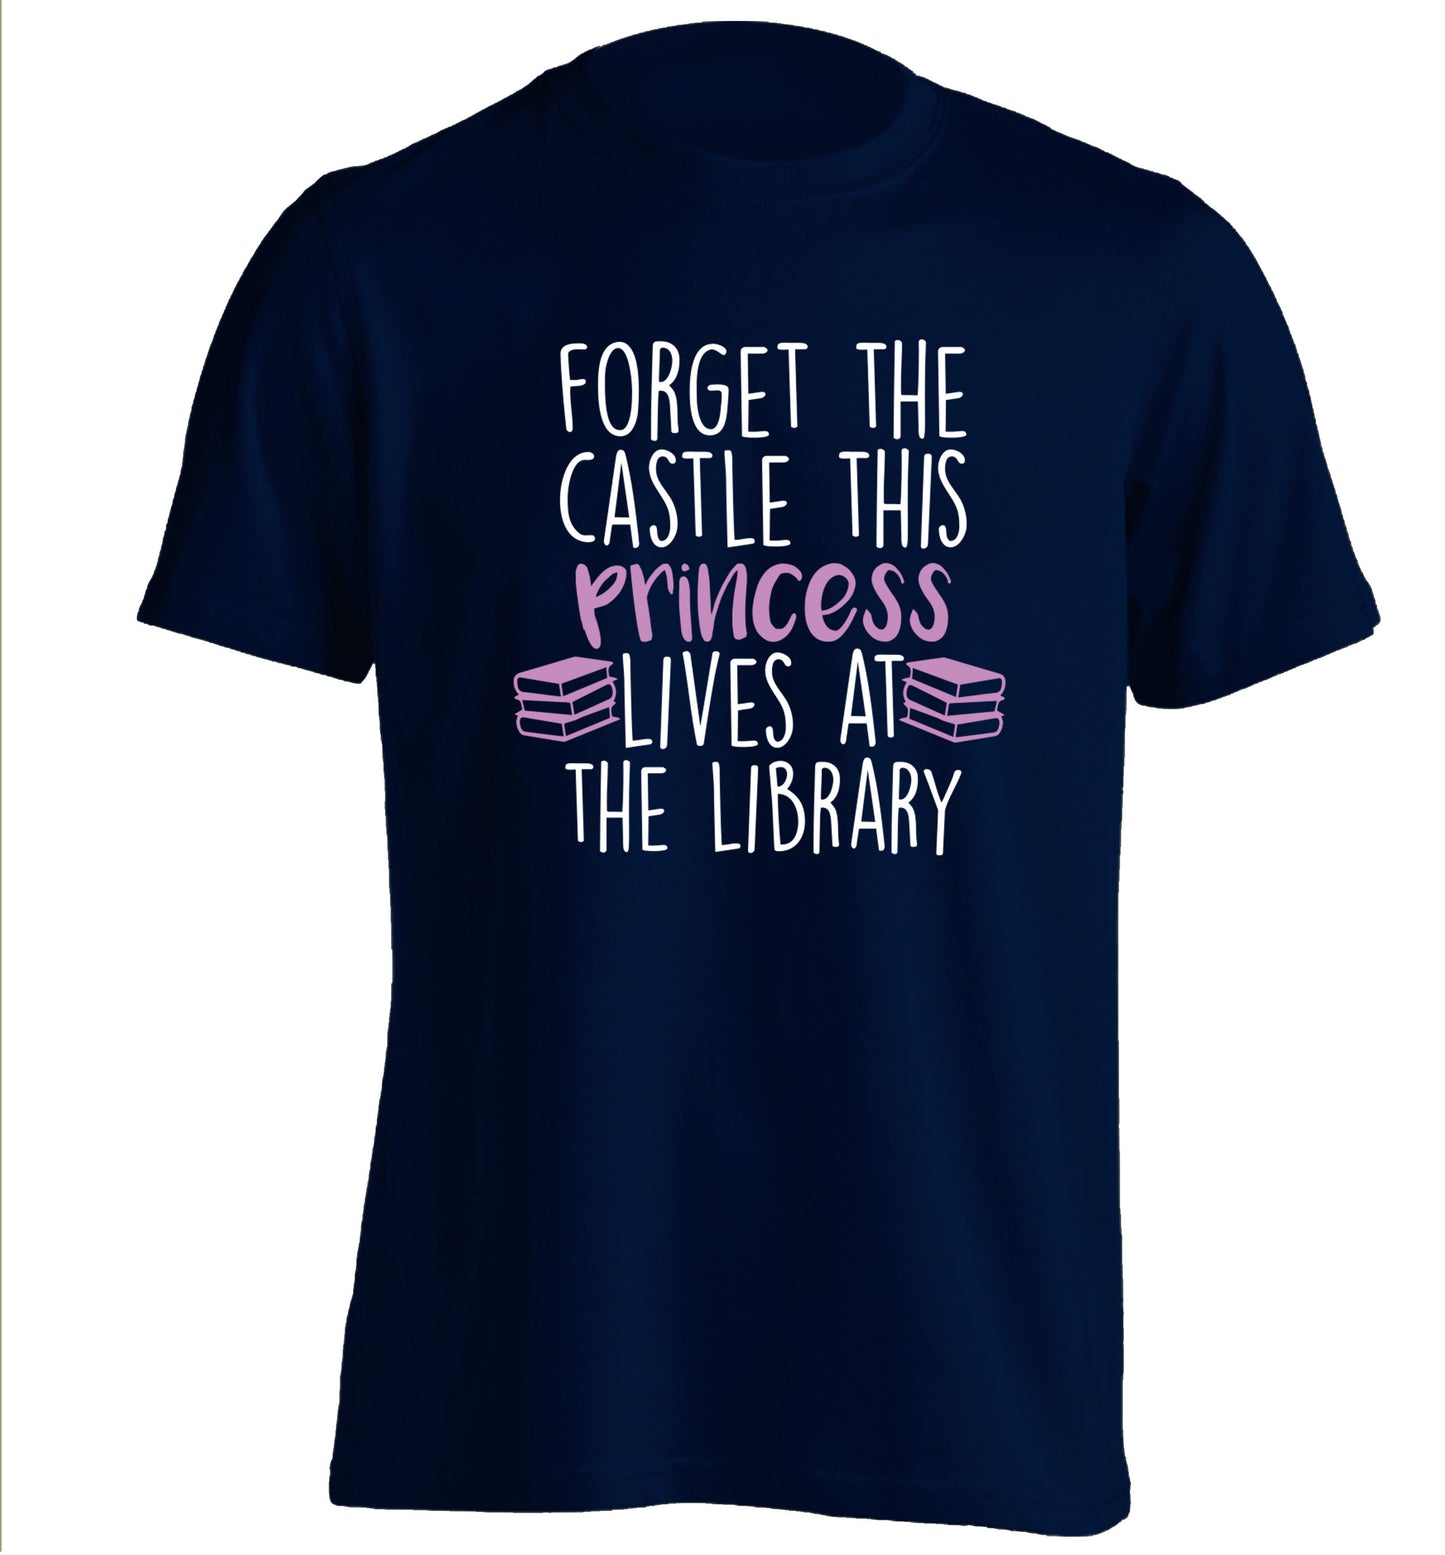 Forget the castle this princess lives at the library adults unisex navy Tshirt 2XL